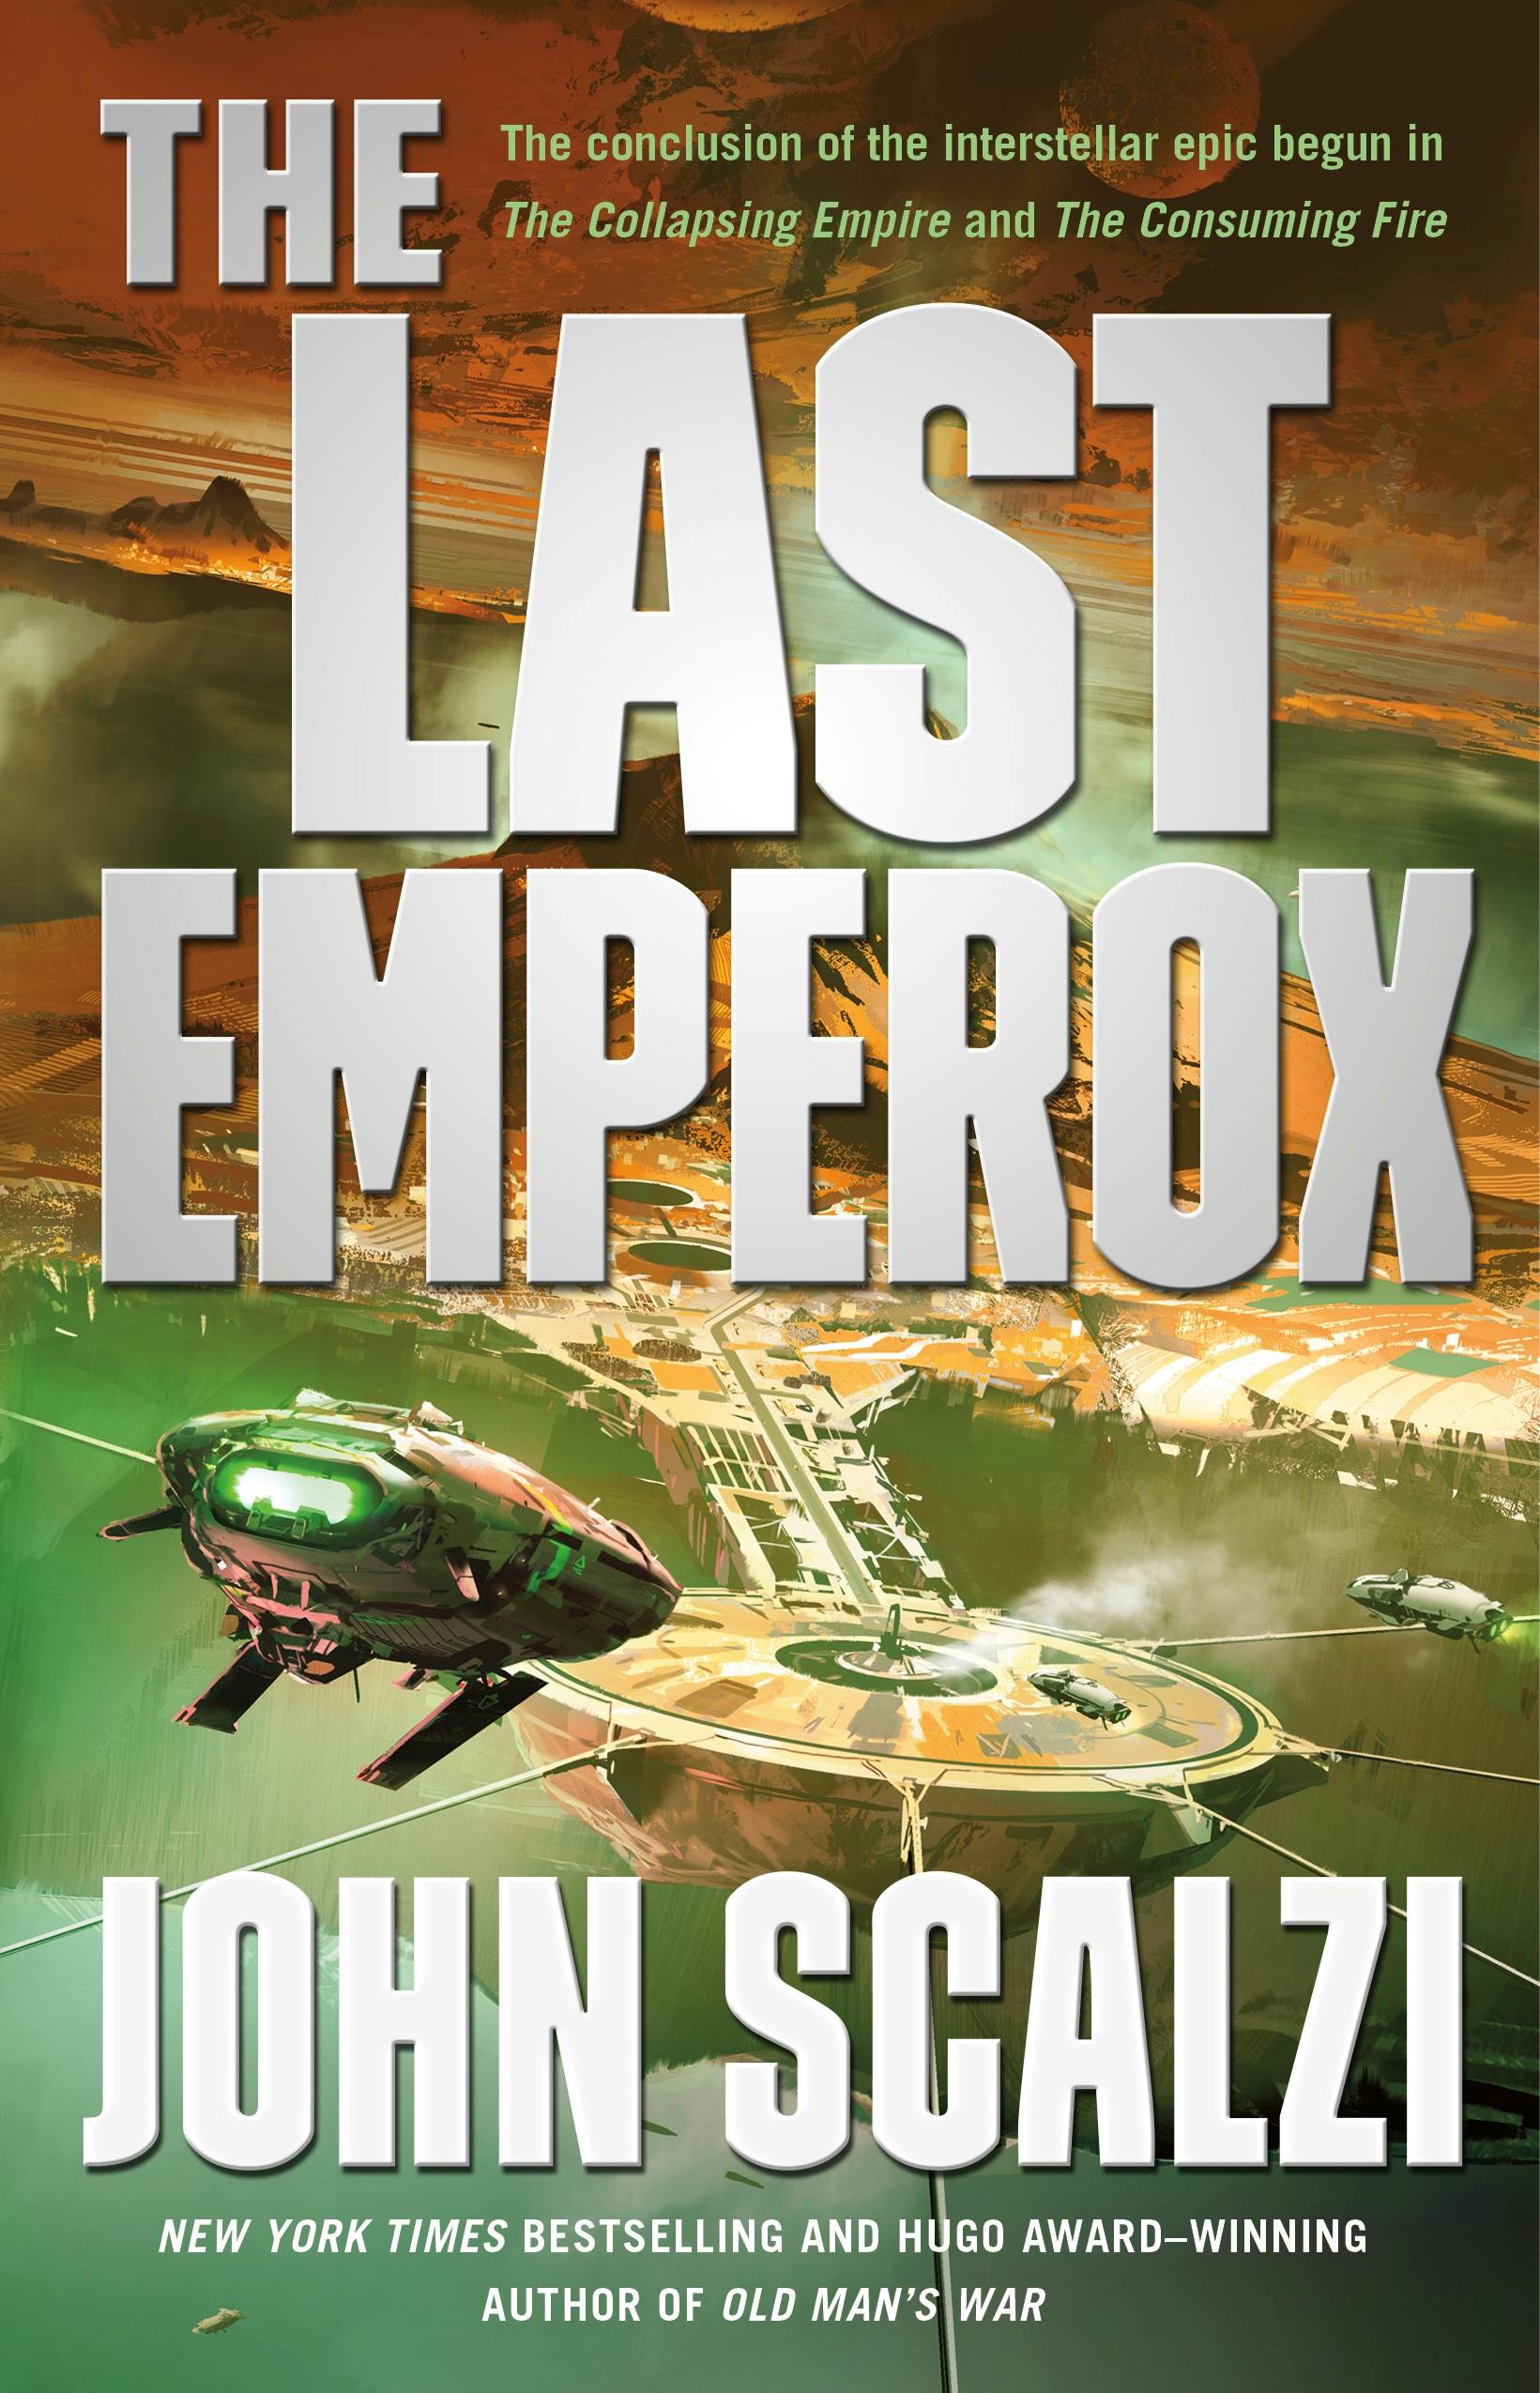 Cover for the book titled as: The Last Emperox